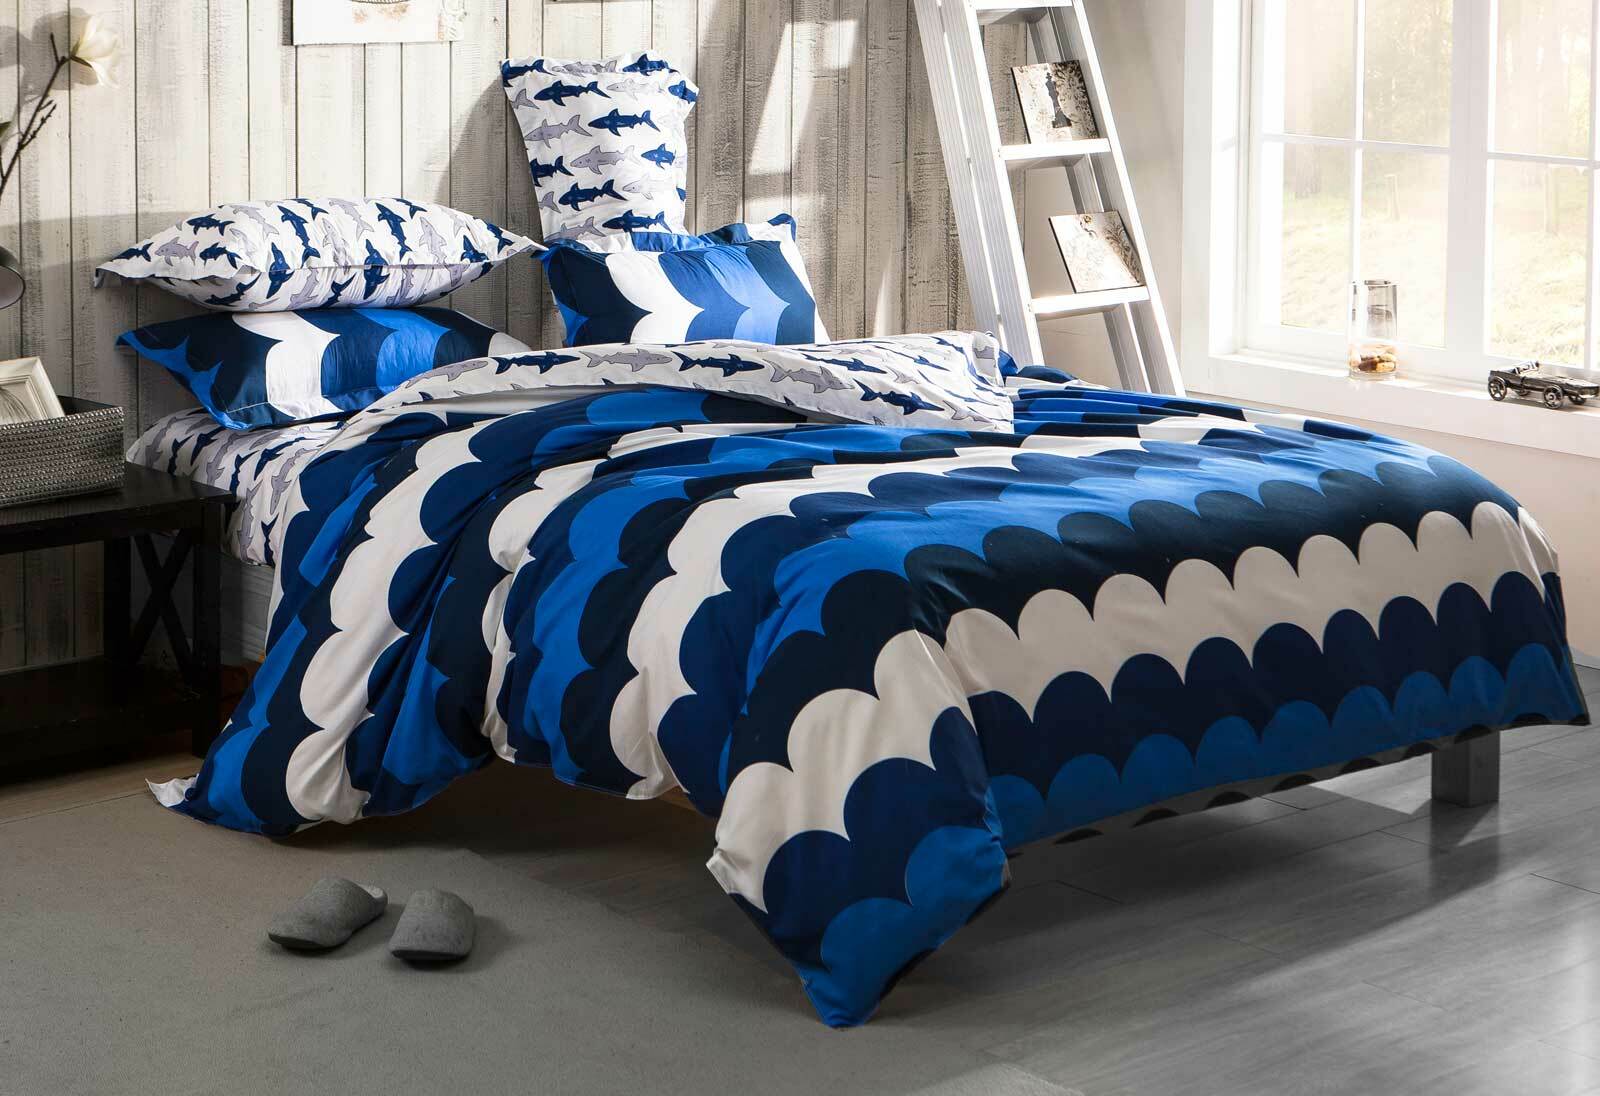 Ricoco Surf On Bed Quilt Cover Set Queen Or King Doona Cover Set